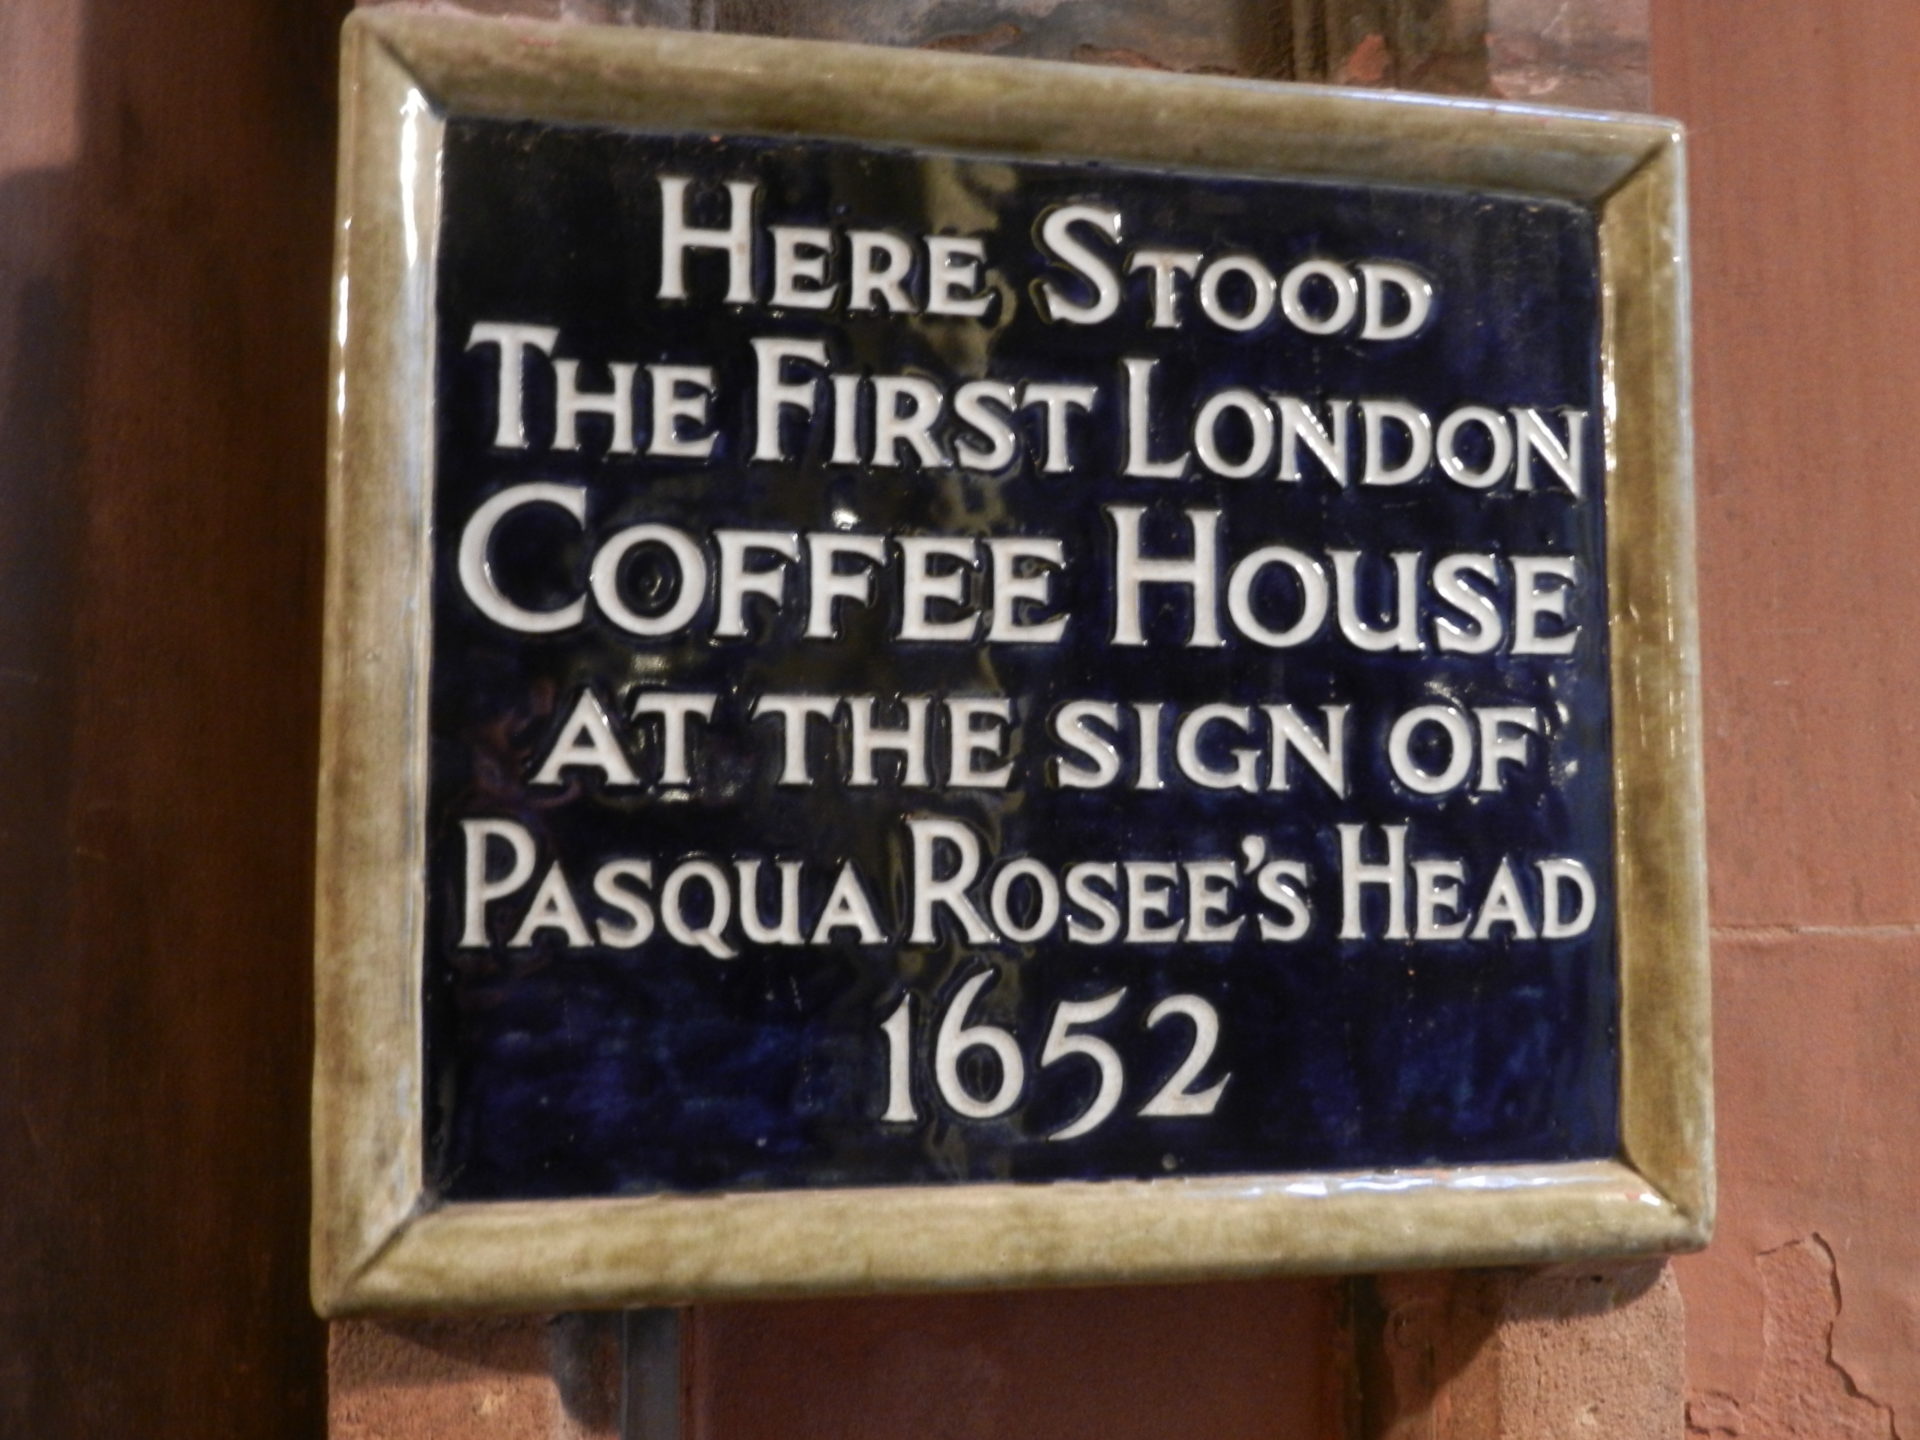 Plaque reading "here stood the first London Coffee House at the sign of Pasqua Rosee's Head 1652"